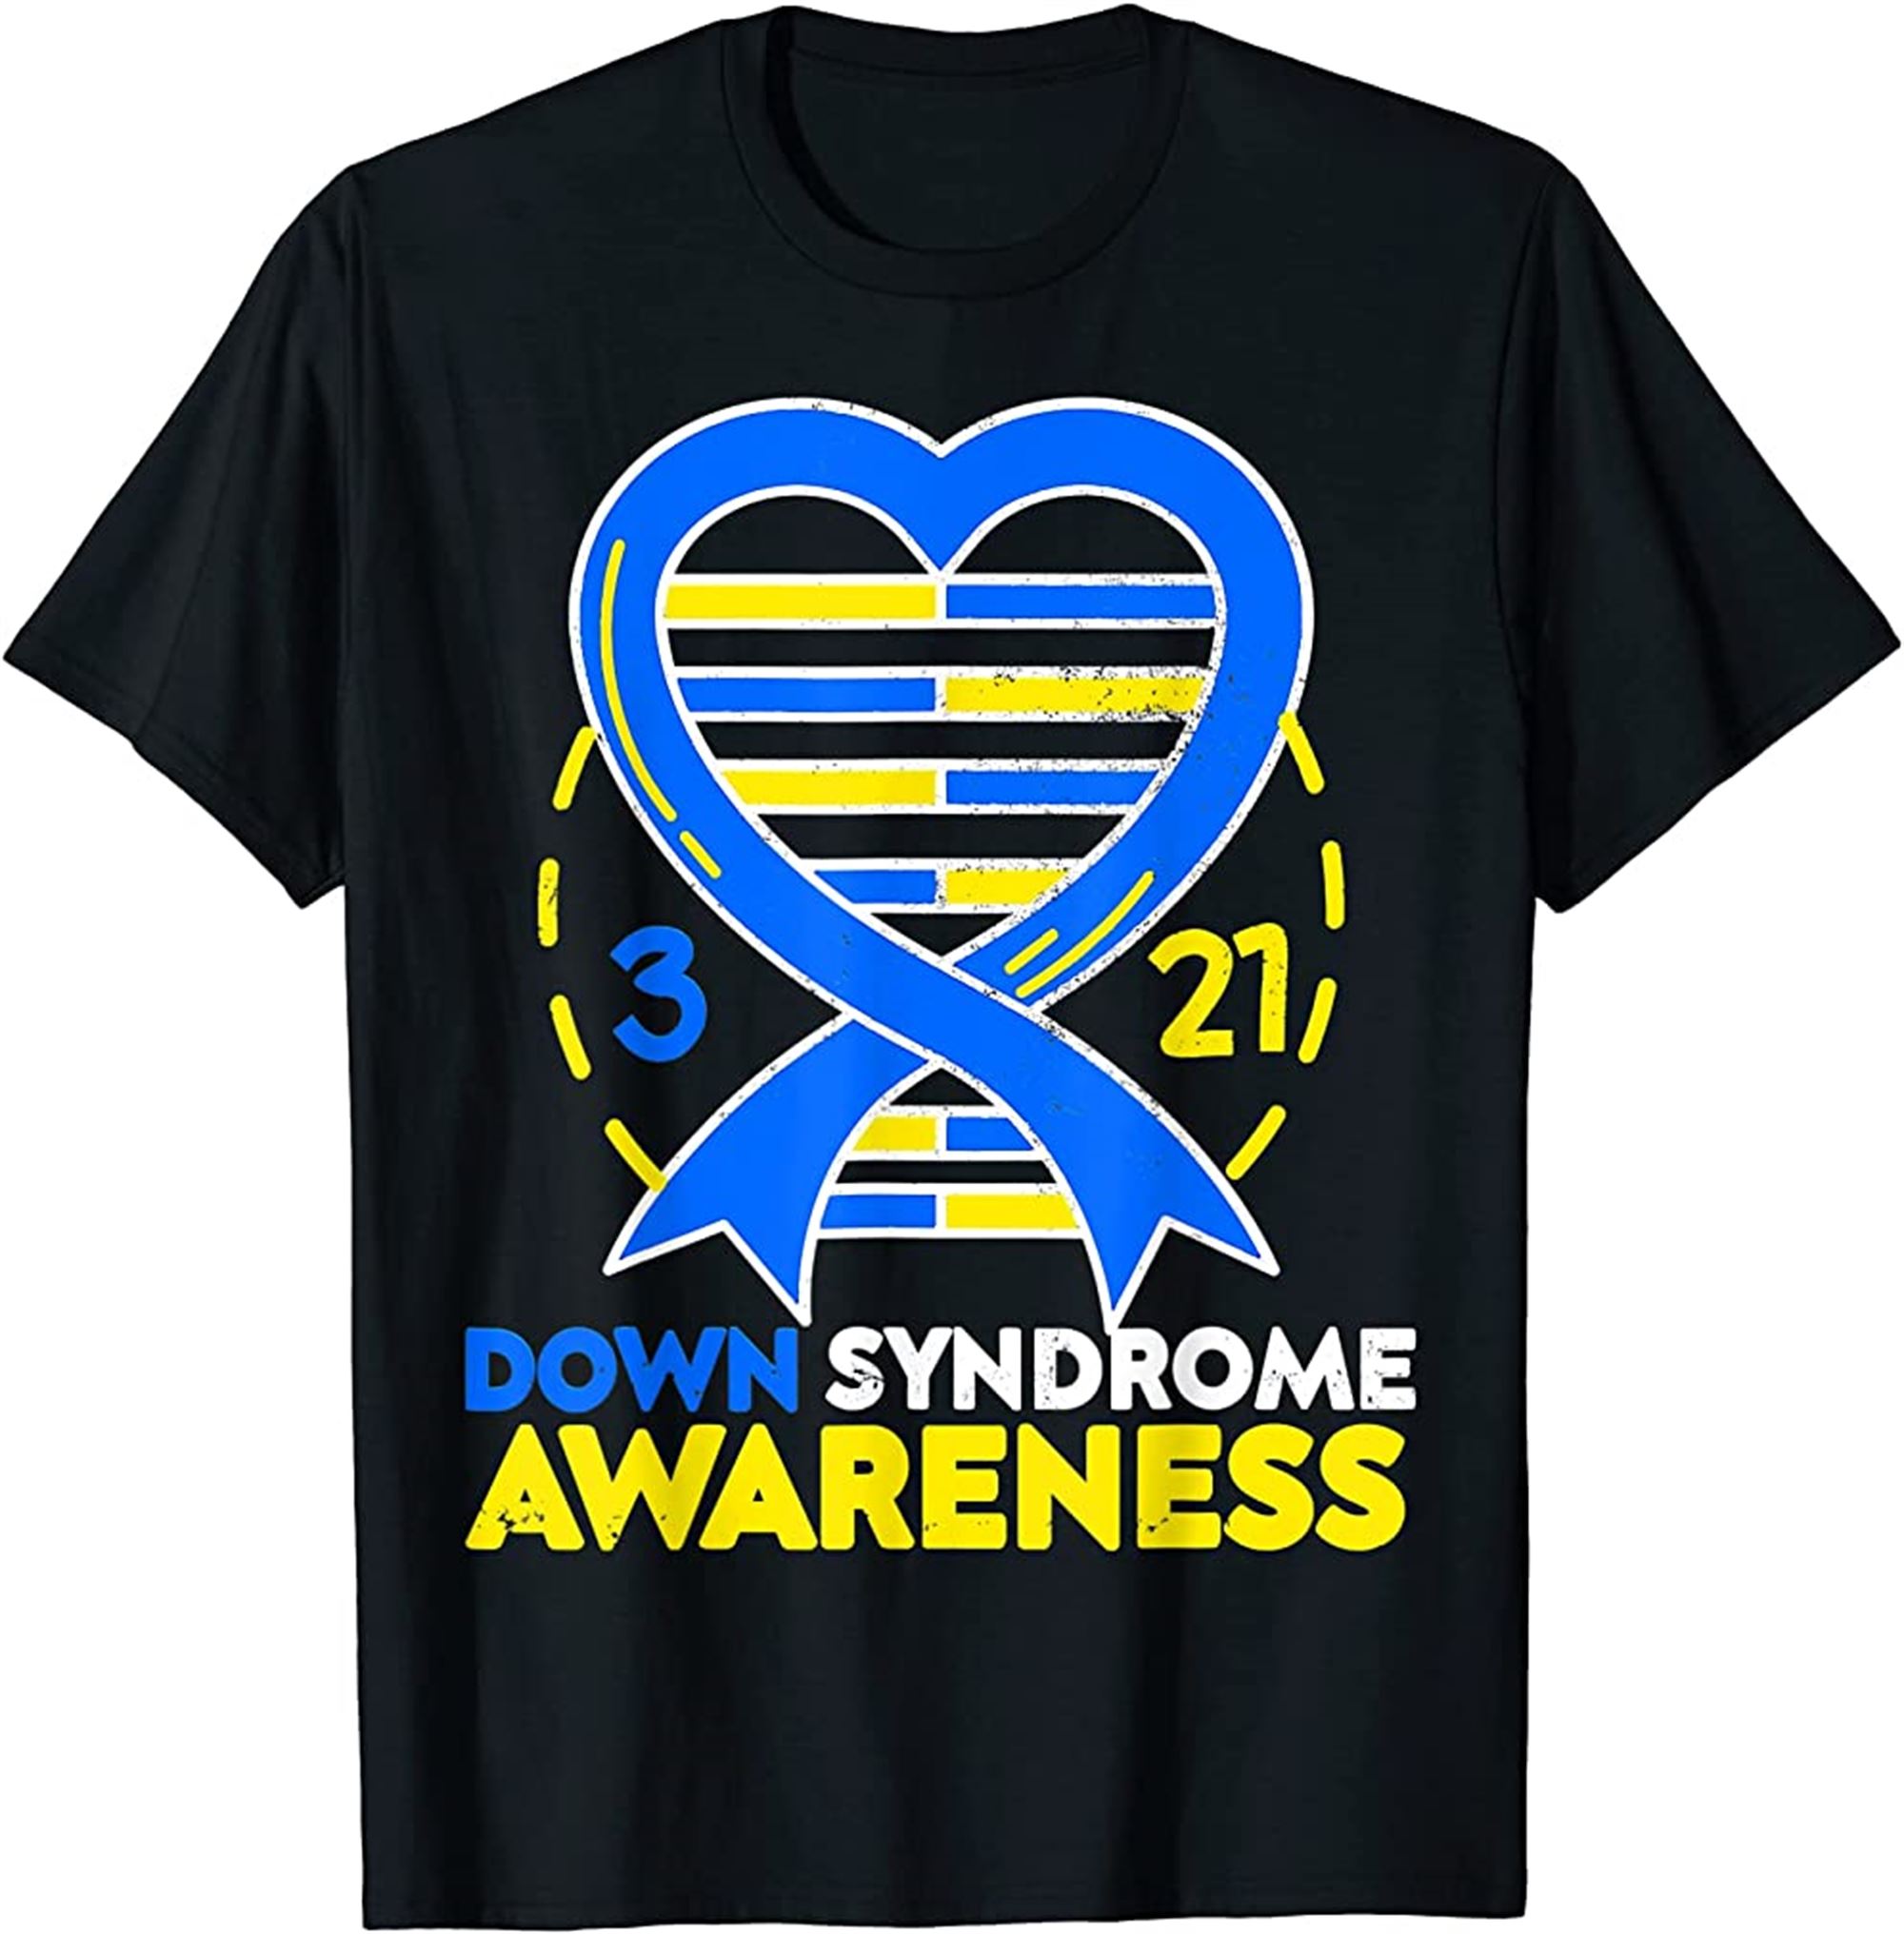 World Down Syndrome Day Awareness Ribbon Heart 21 March T-shirt Size Up To 5xl